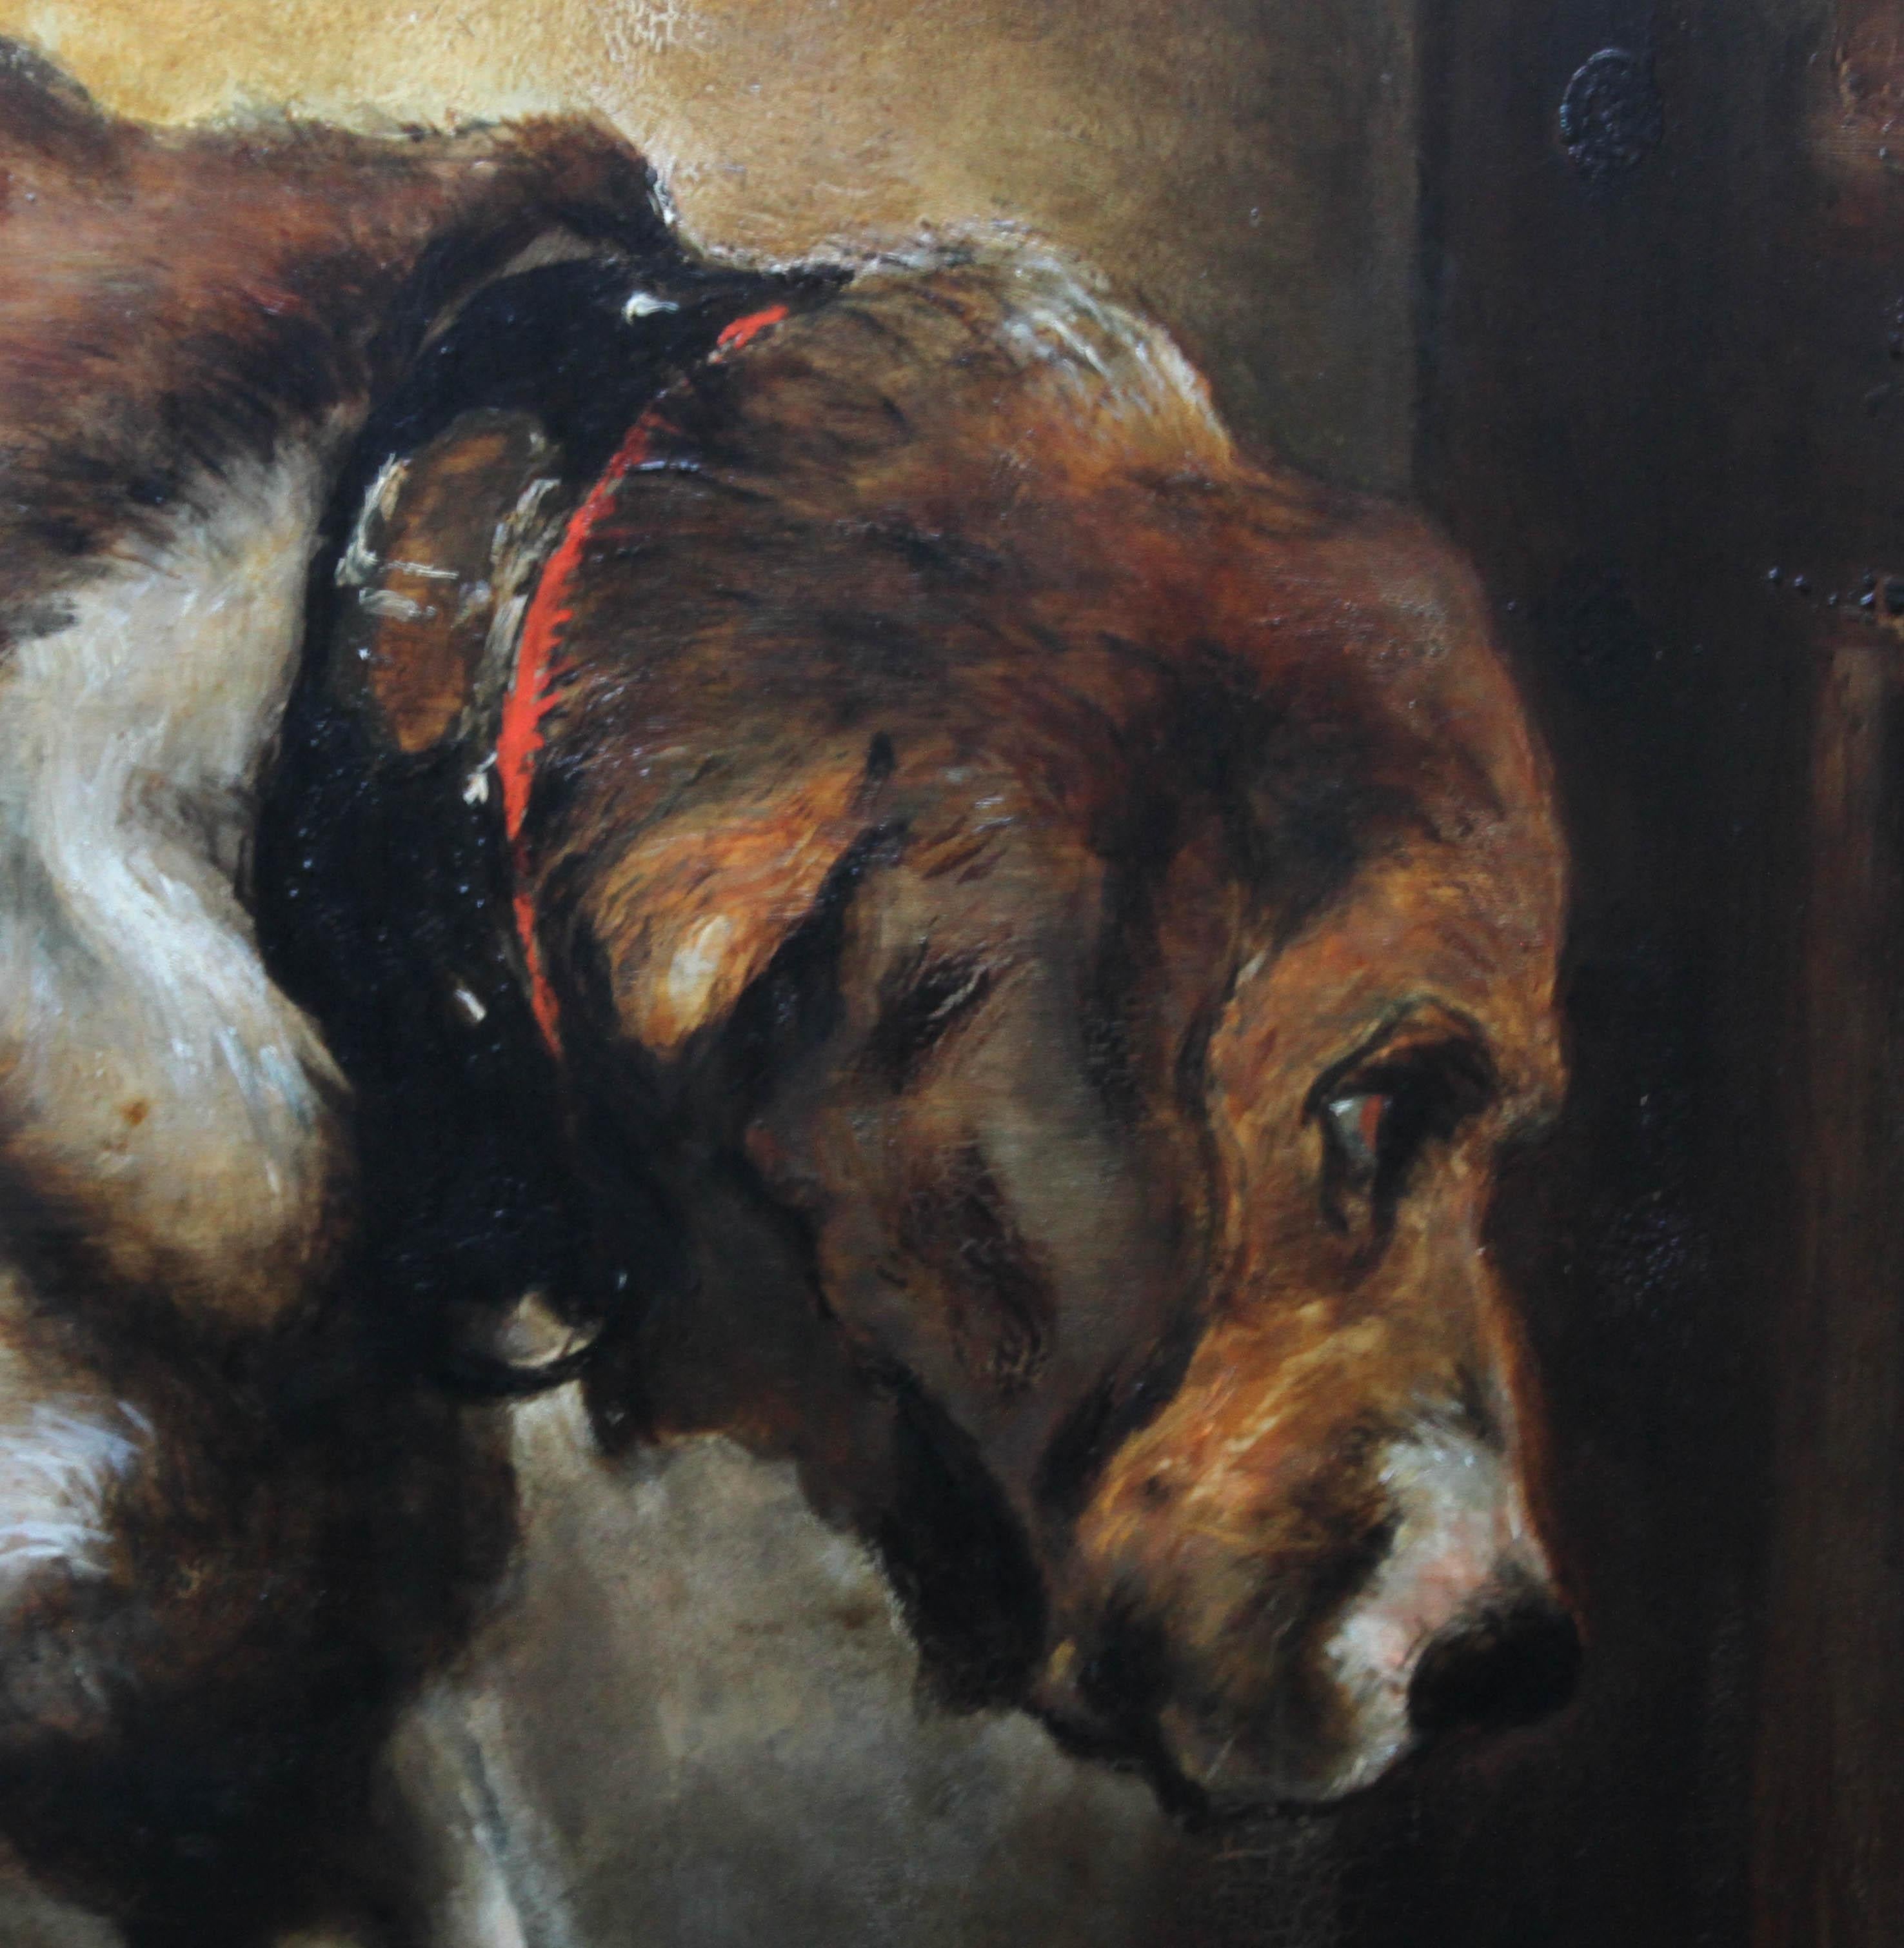 This lovely Victorian oil painting is by British artist E Stott. The painting, painted circa 1880 is a portrait of a large dog. The artist is clearly a very talented dog artist and keen observer of dogs to capture this one's expression and posture